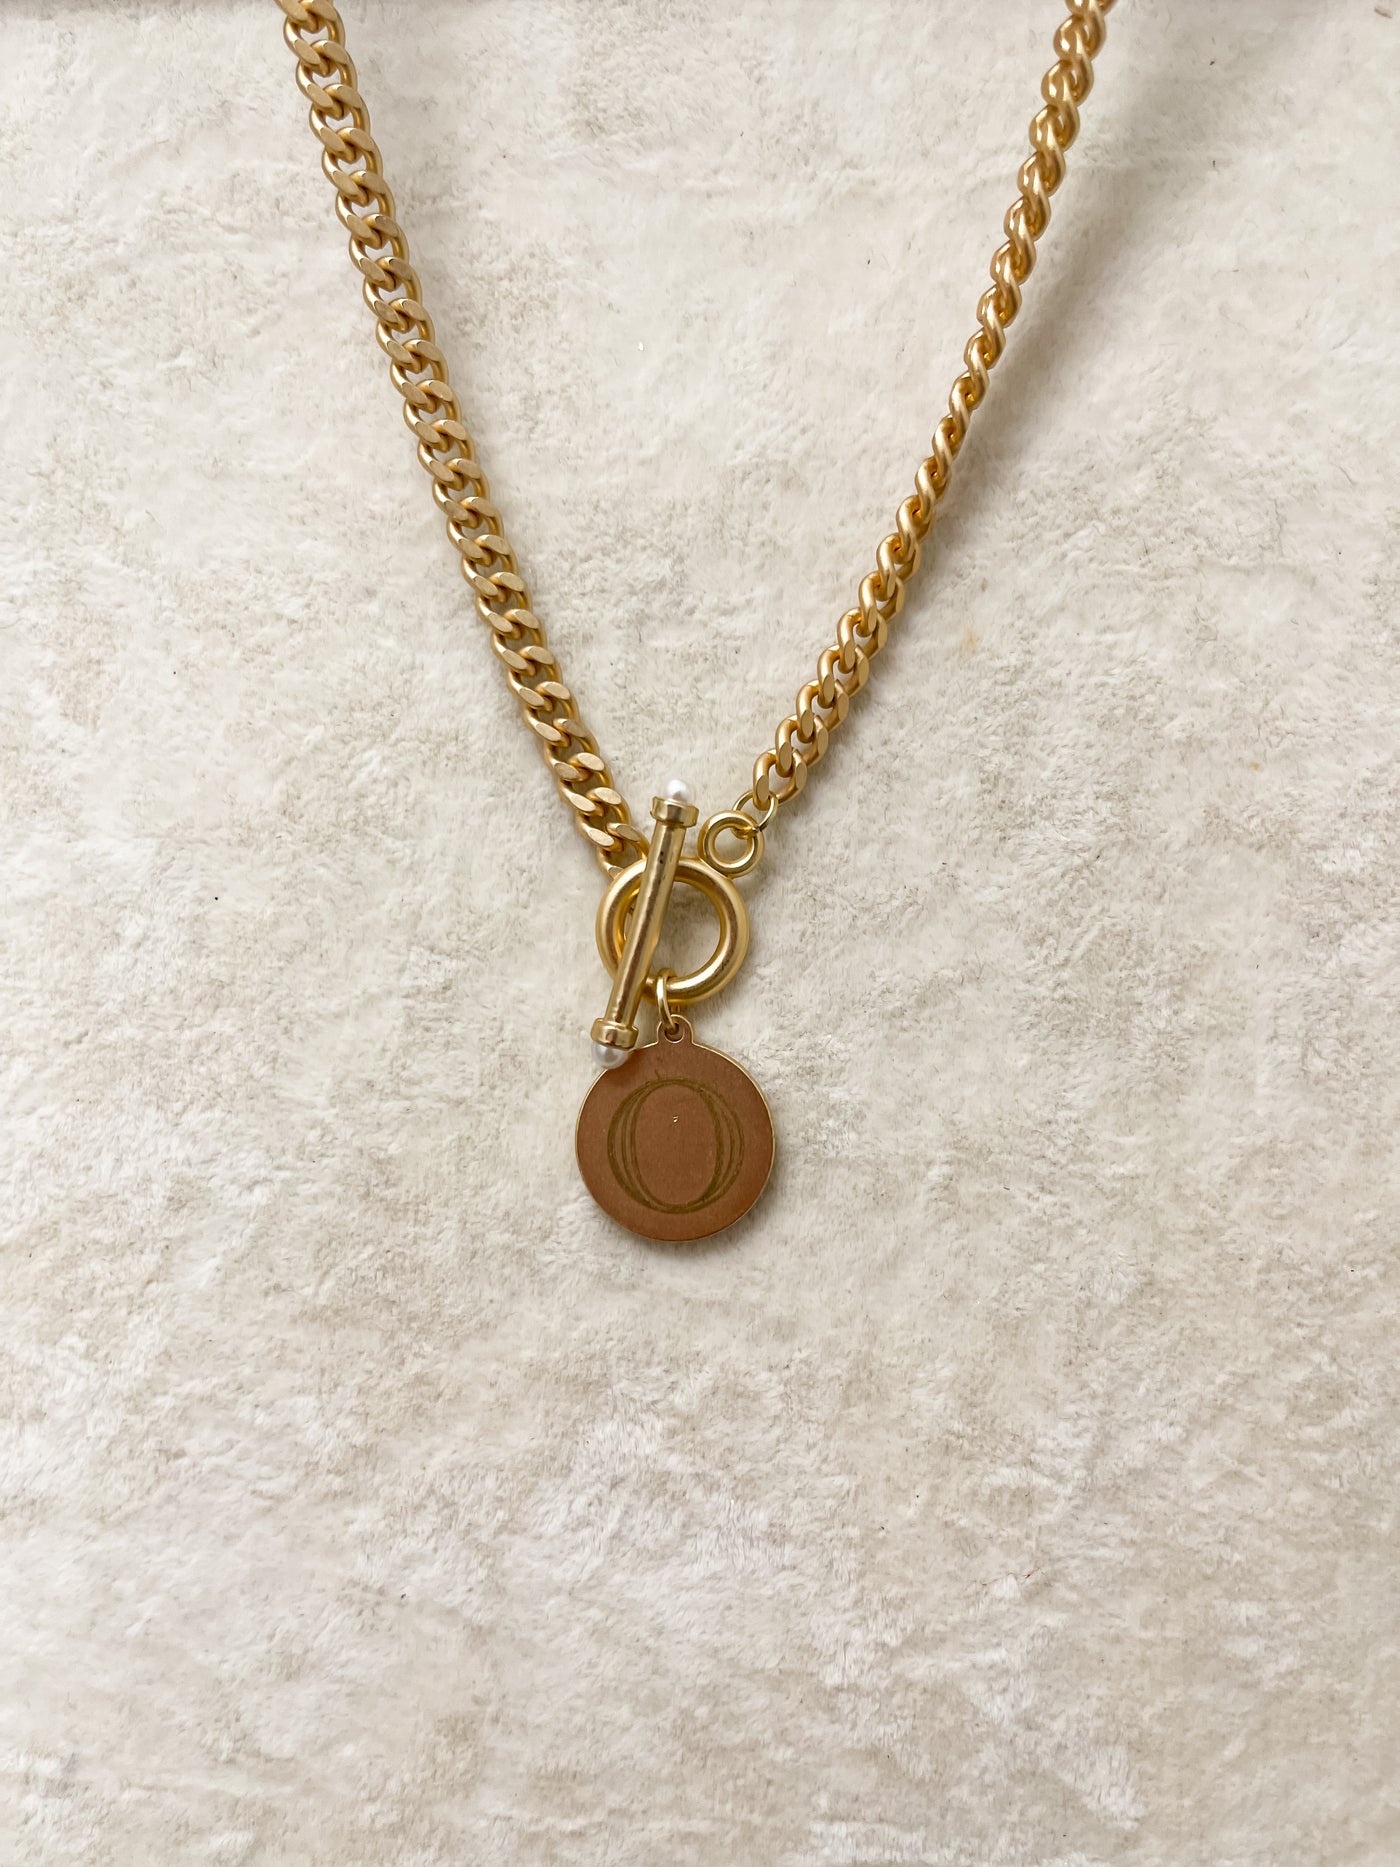 Engraved Initial Necklace